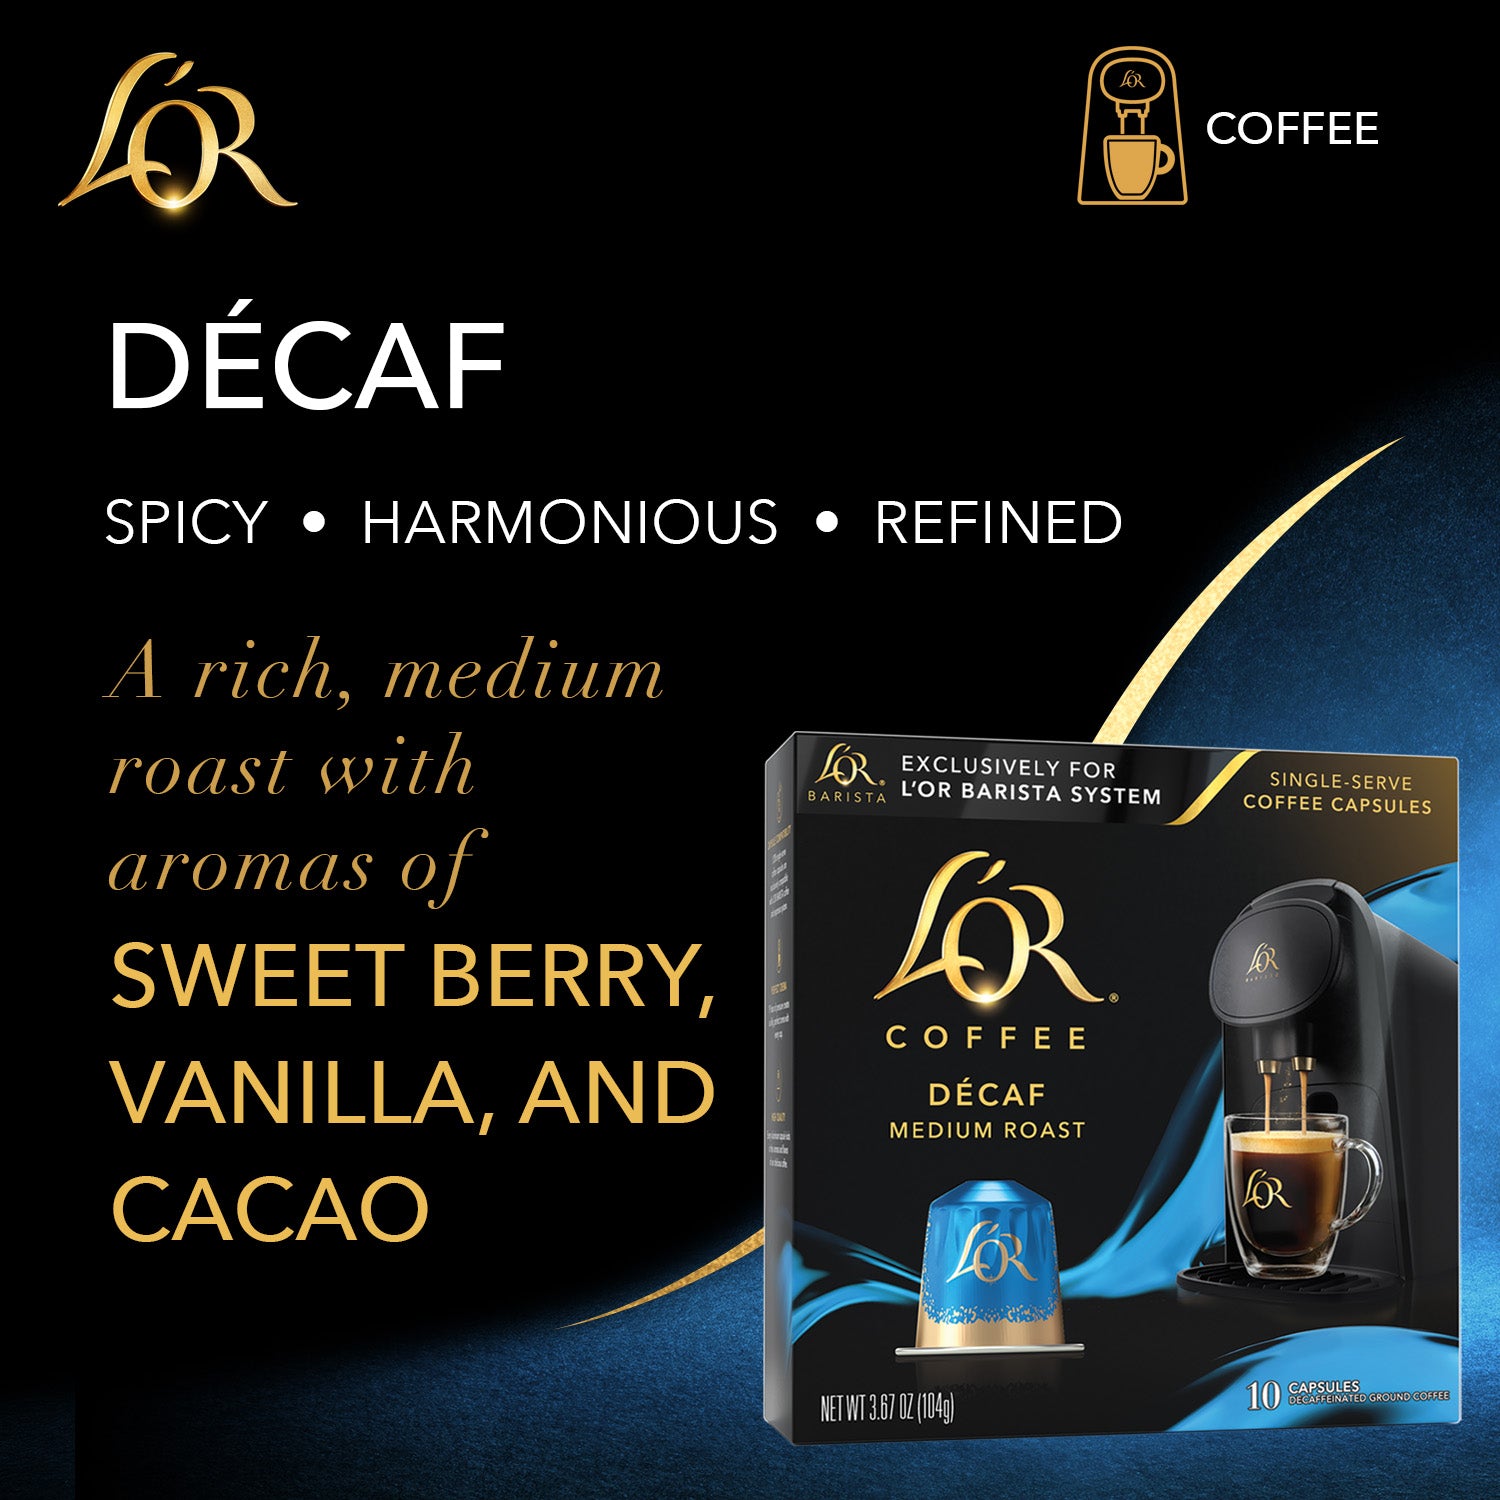 A rich, medium roast with aromas of sweet berry, vanilla, and cacao.